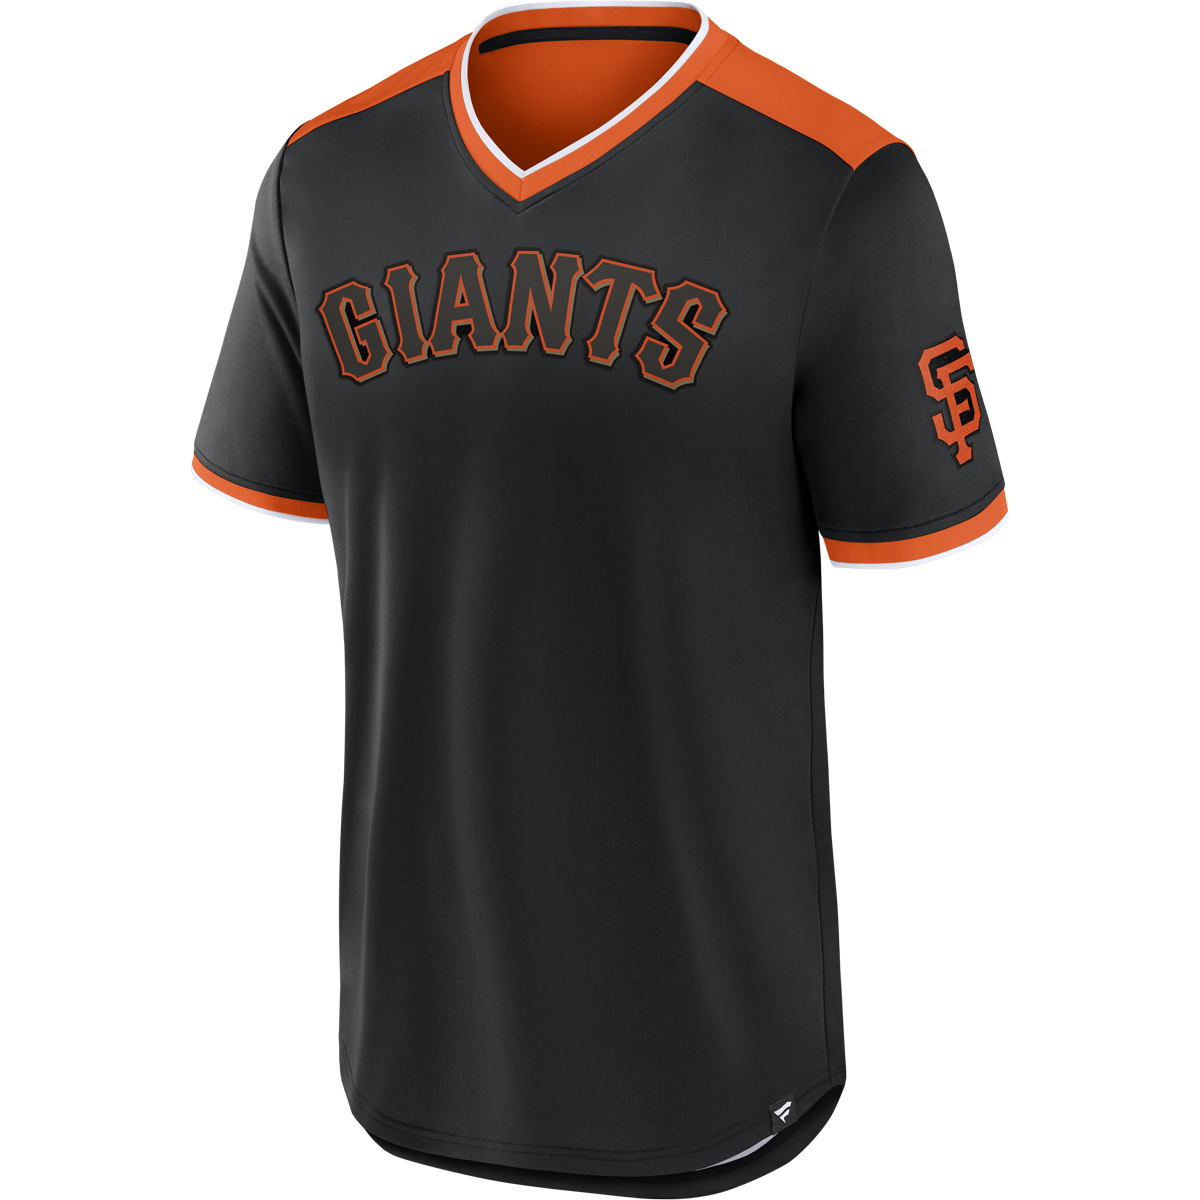 San Francisco Giants Apparel, Giants Jersey, Giants Clothing and Gear